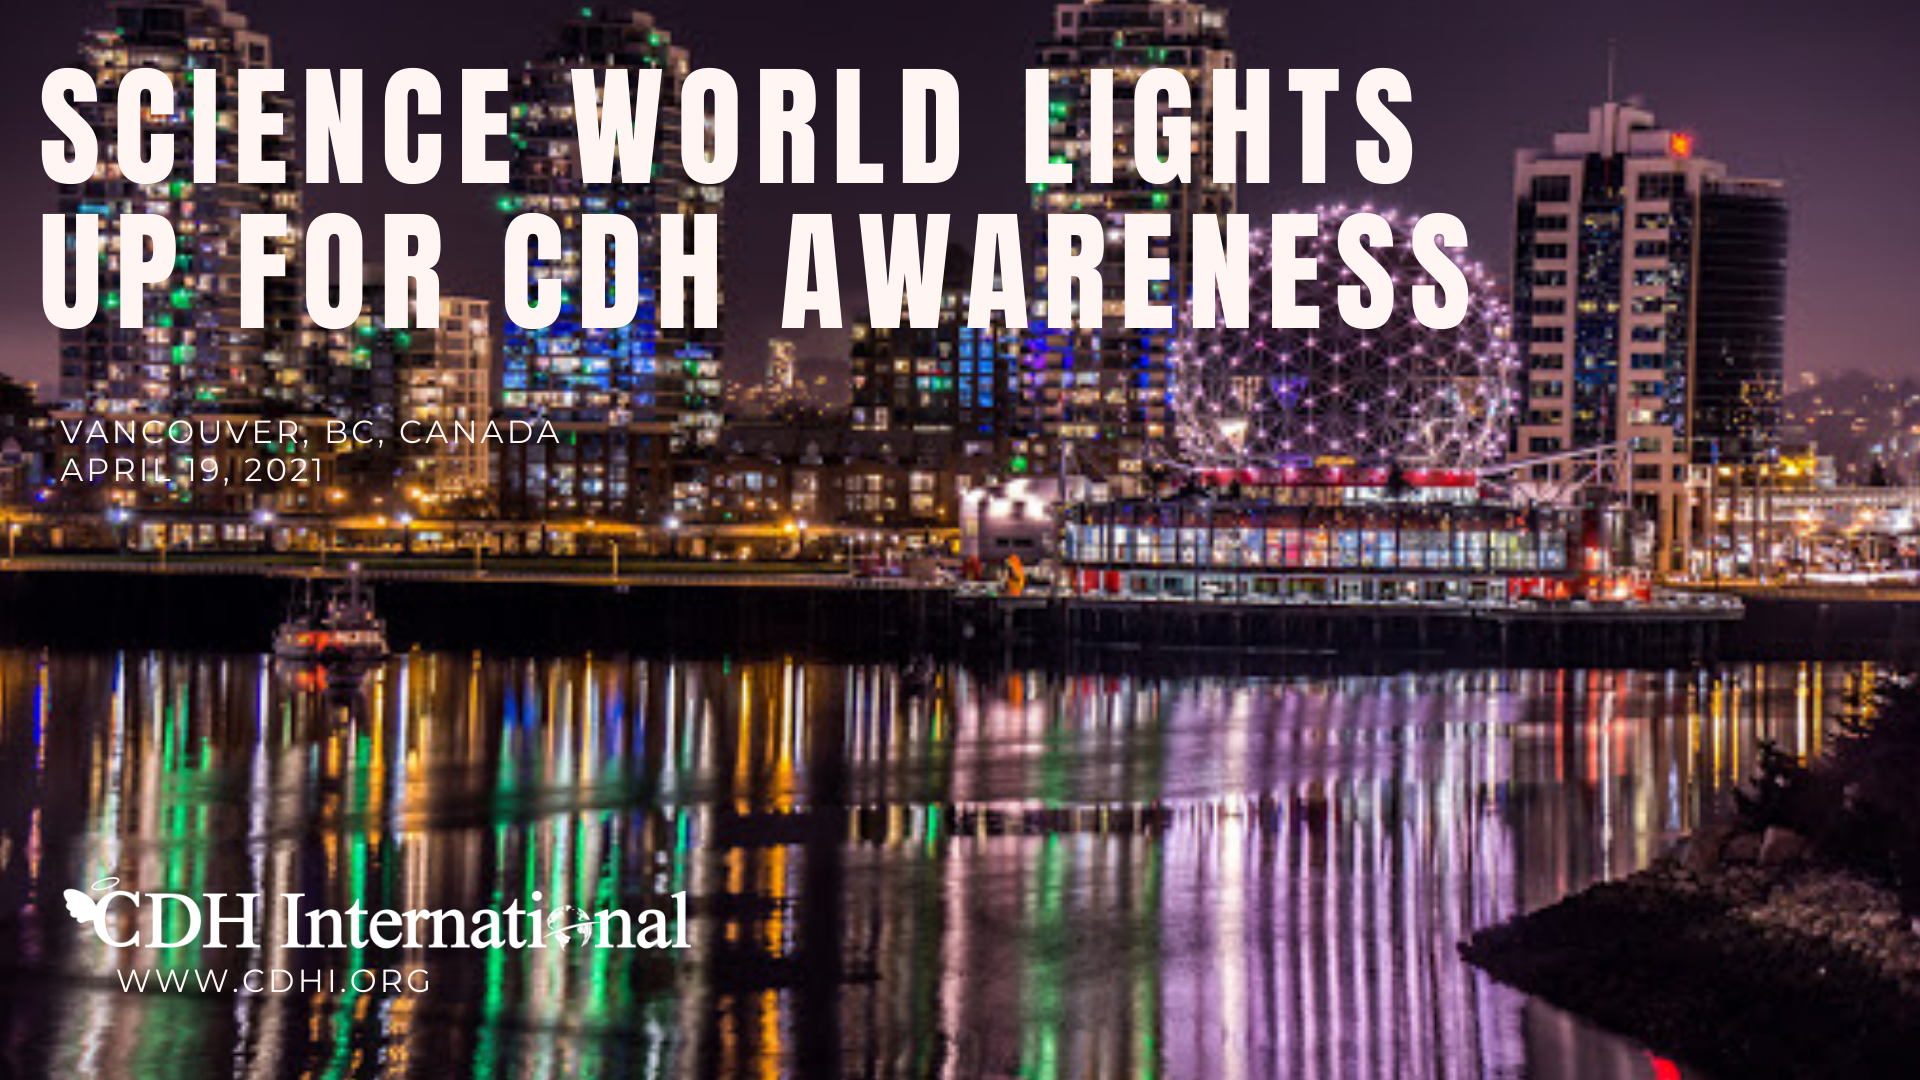 The Vancouver Convention Center Lights Up For CDH Awareness